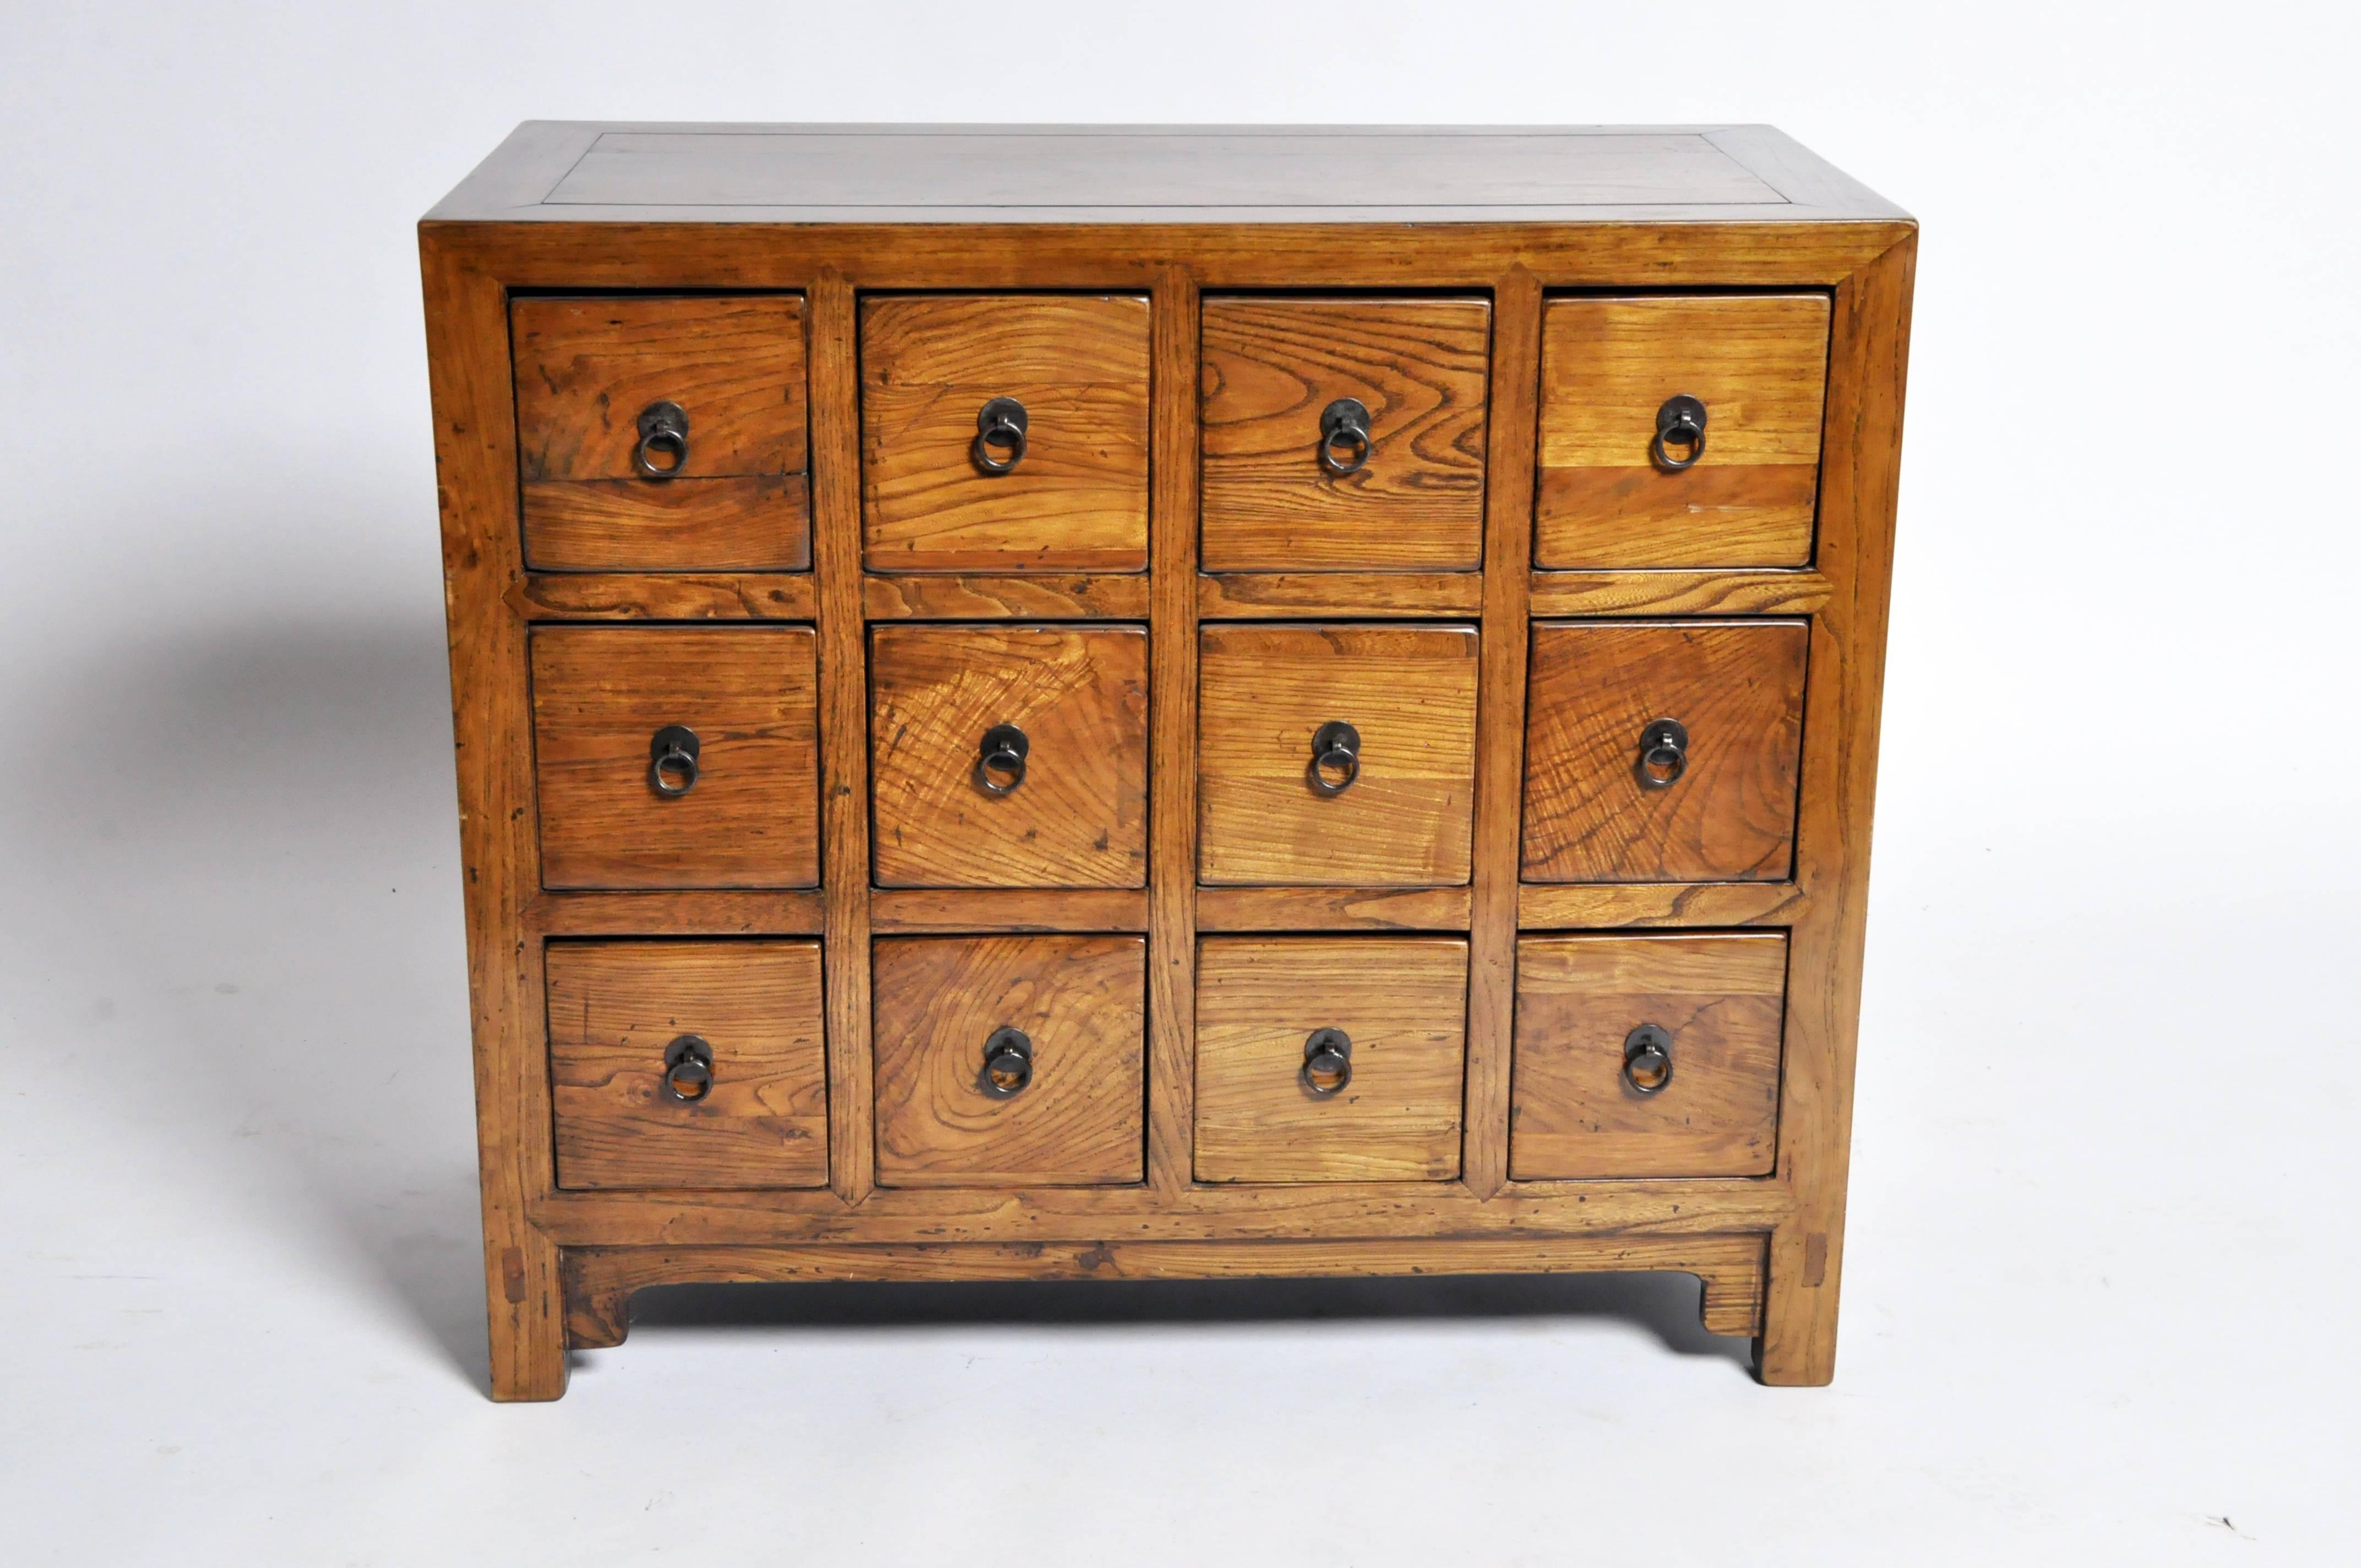 This handsome medicine chest has 12 drawers, each with a metal ring pull handle.